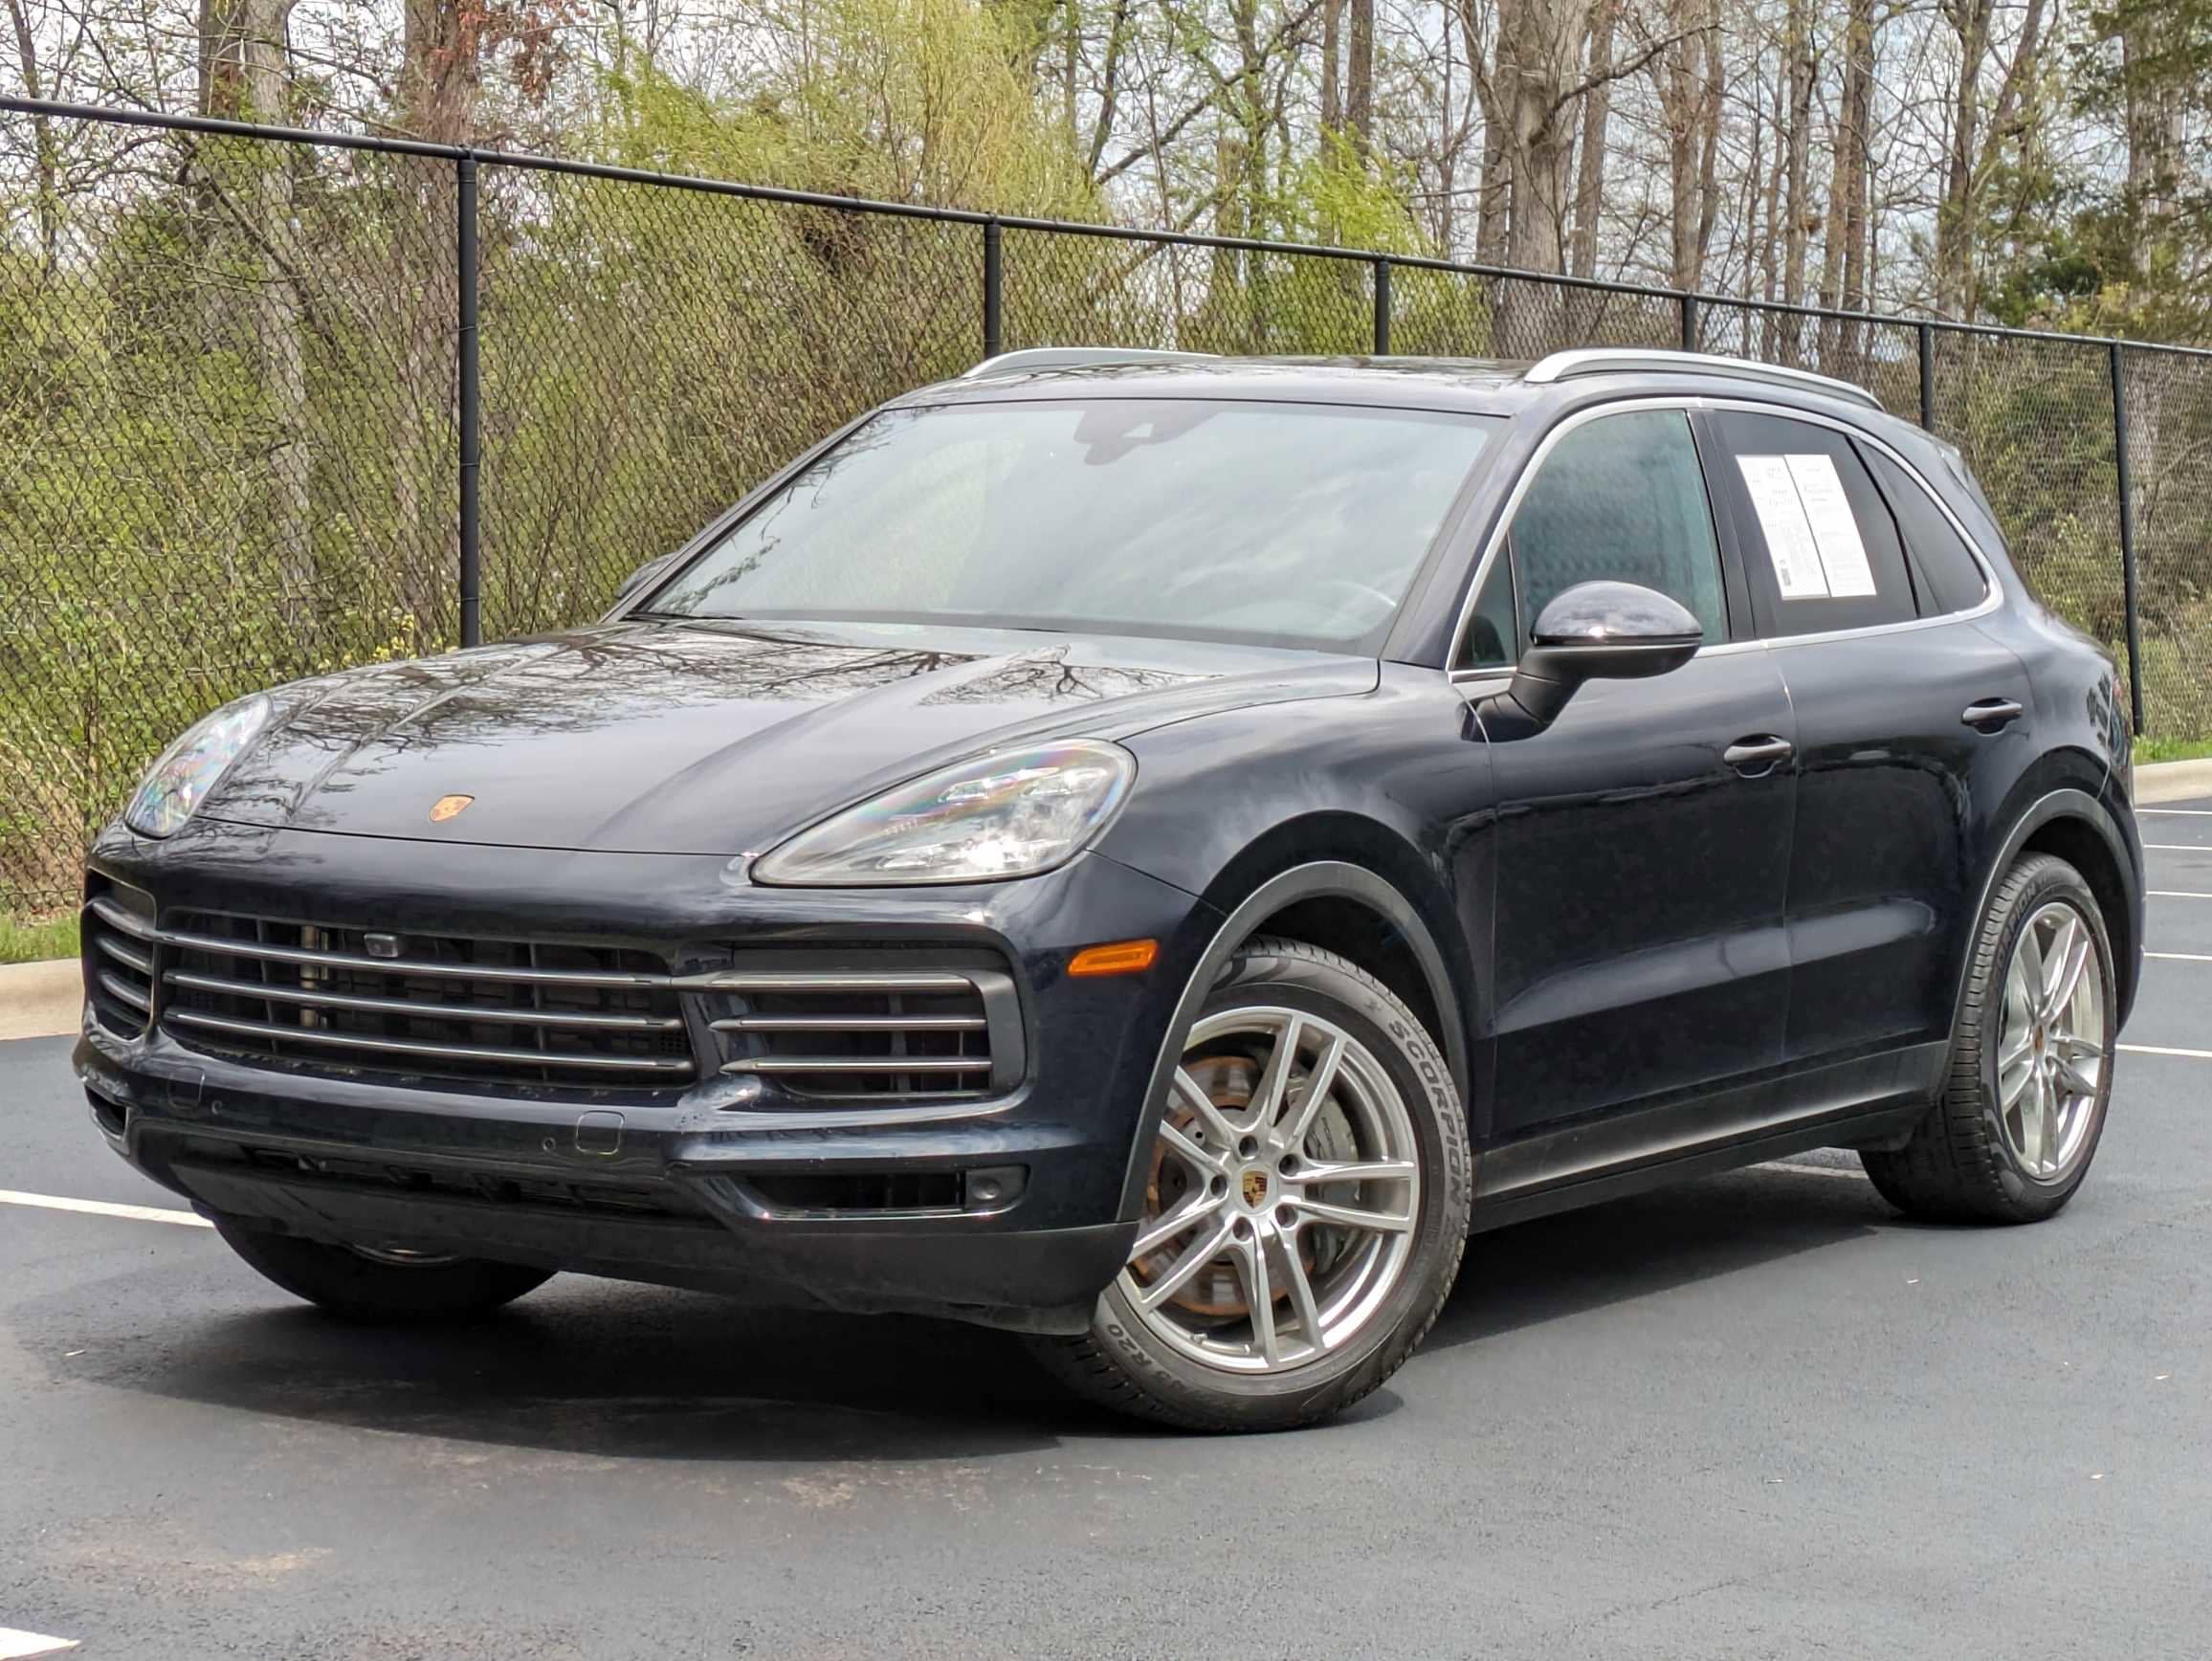 New Inventory | Porsche Southpoint